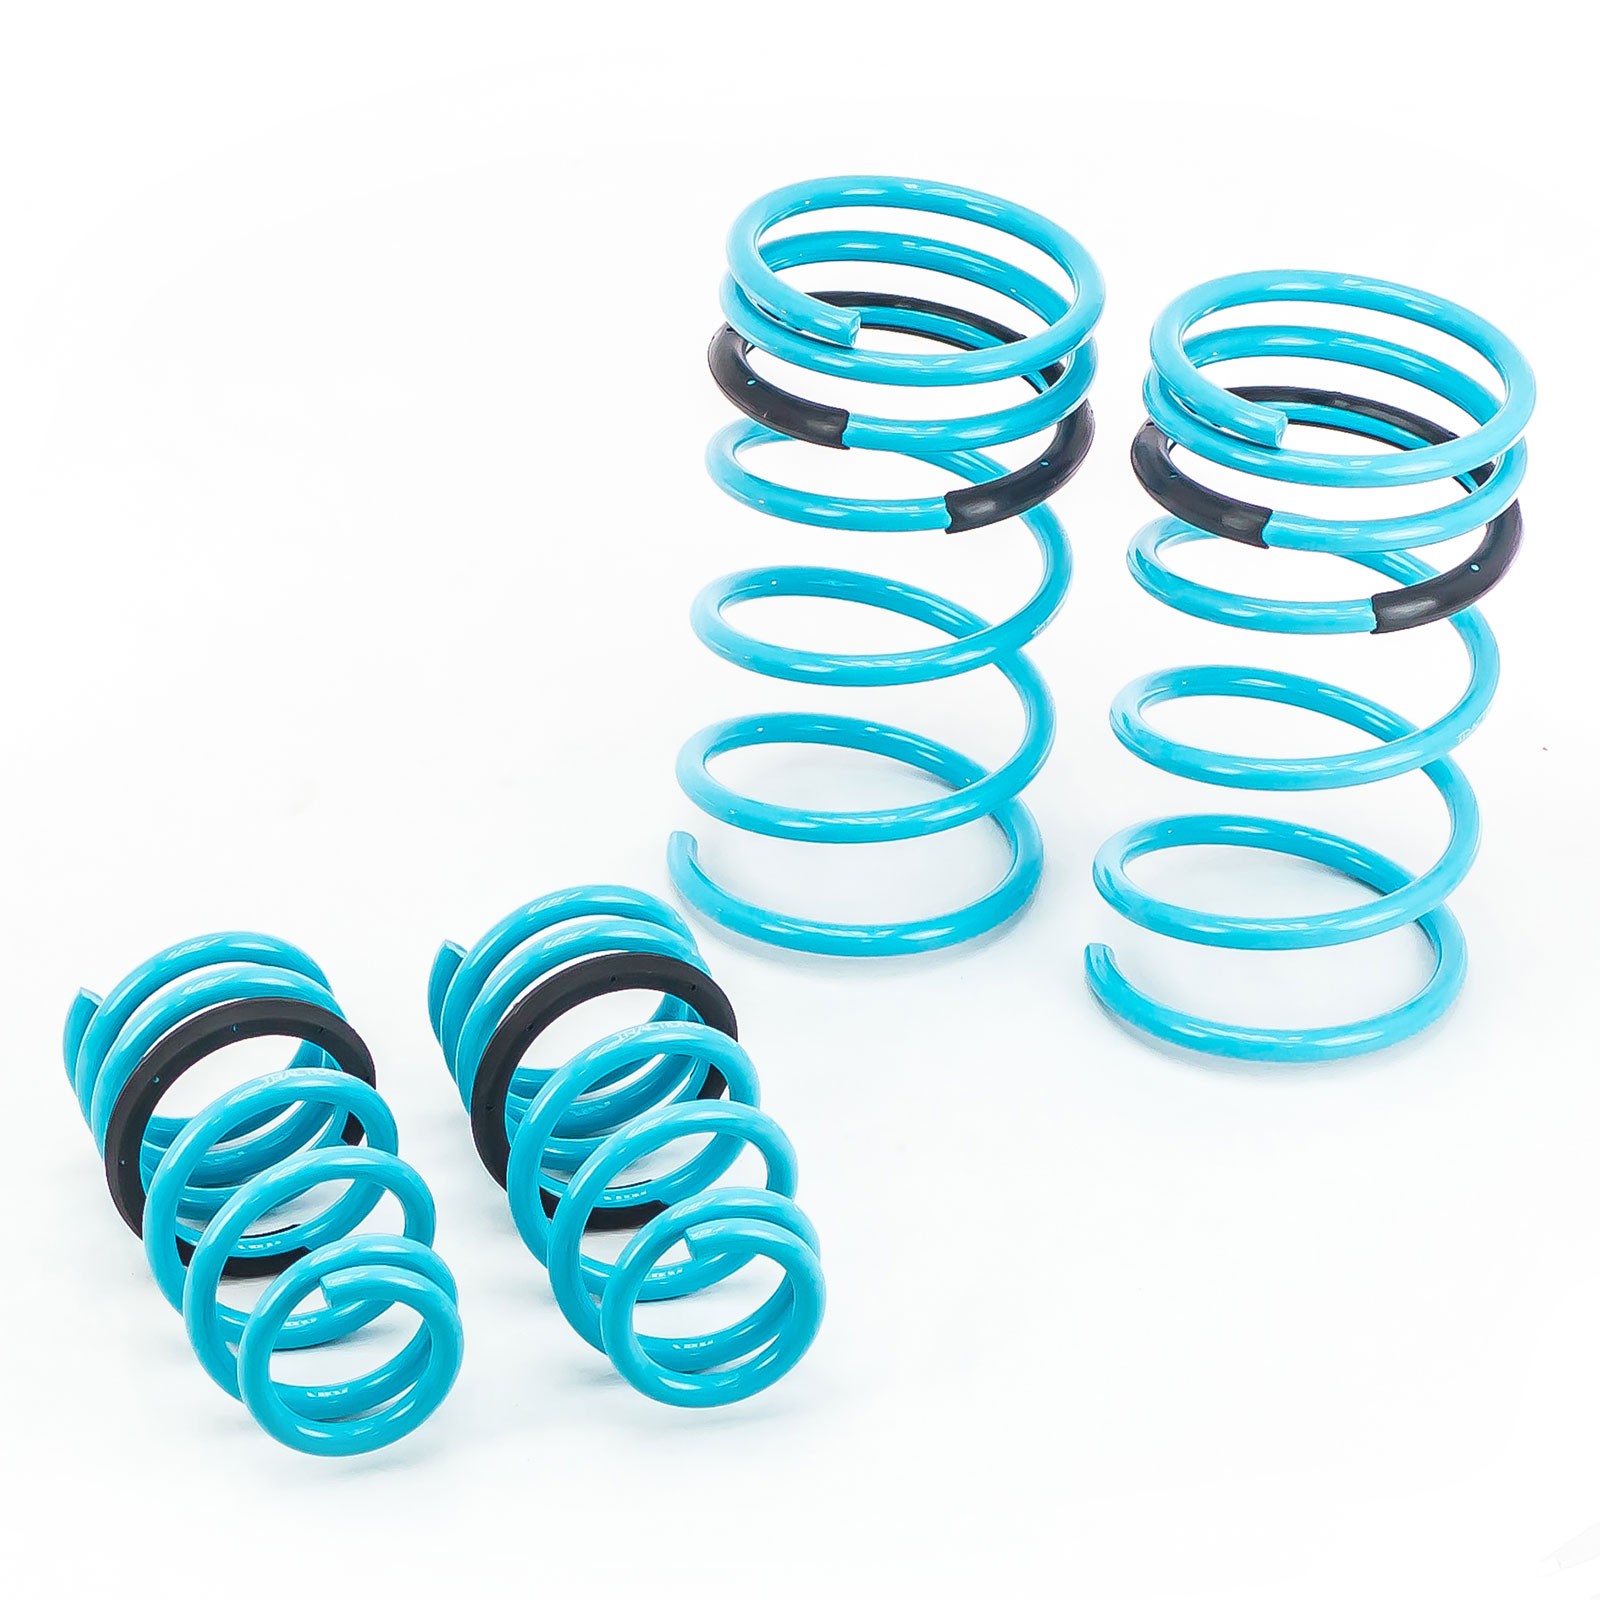 Godspeed Traction-S Lowering Springs For Honda CRV 2012 and up RM1 RM3 RM4